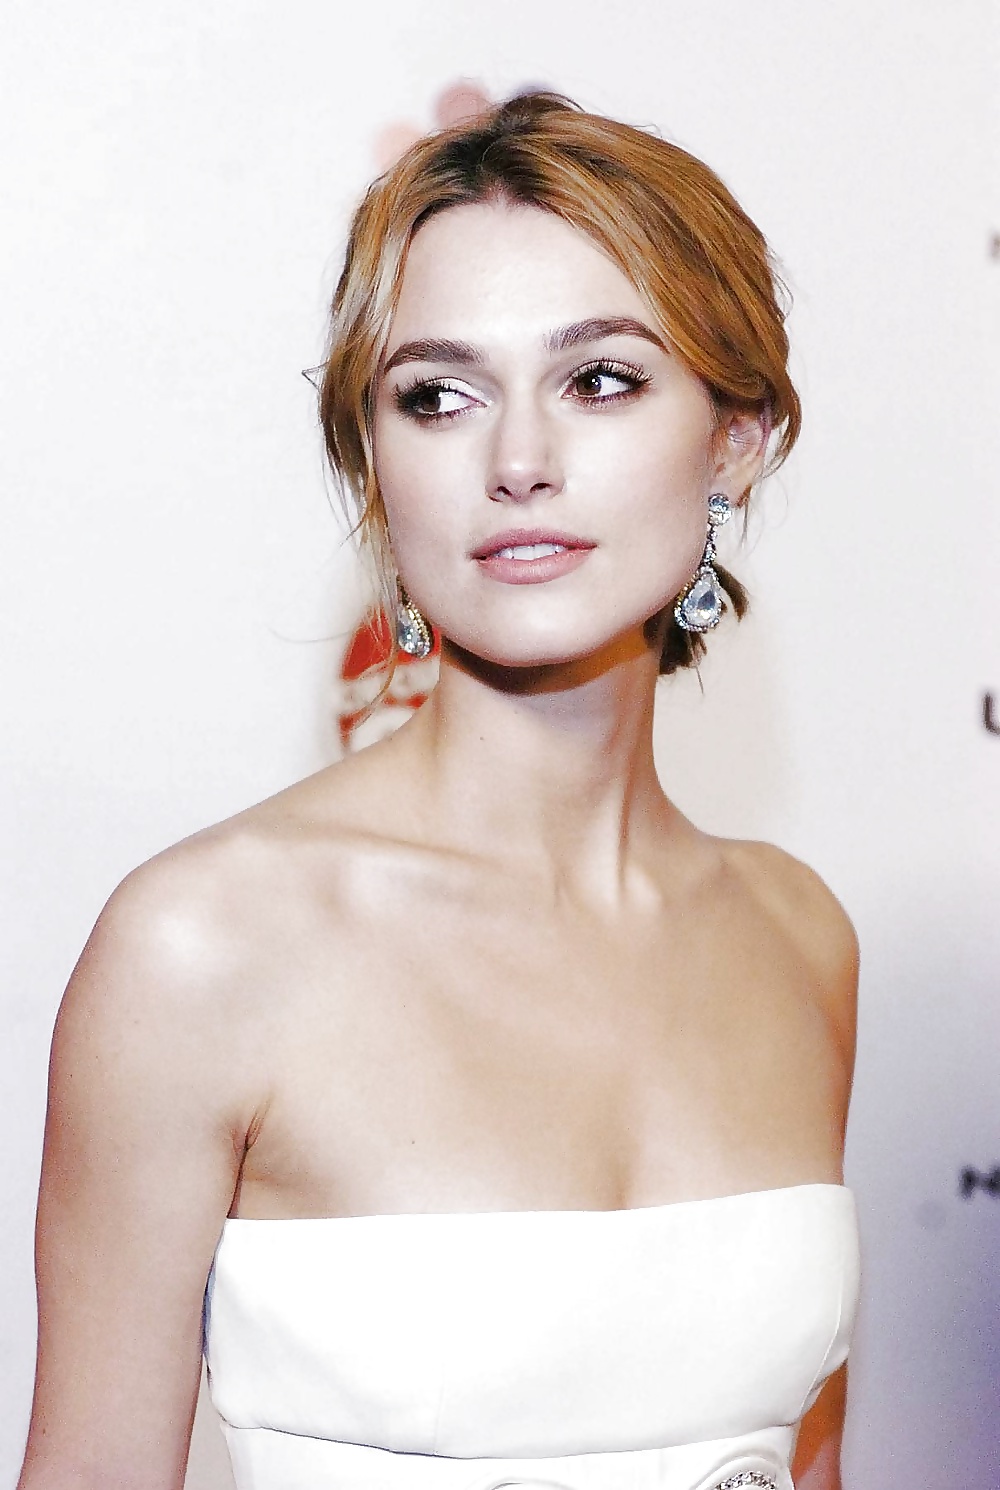 Keira Knightley The Royal Lady of England #35650151